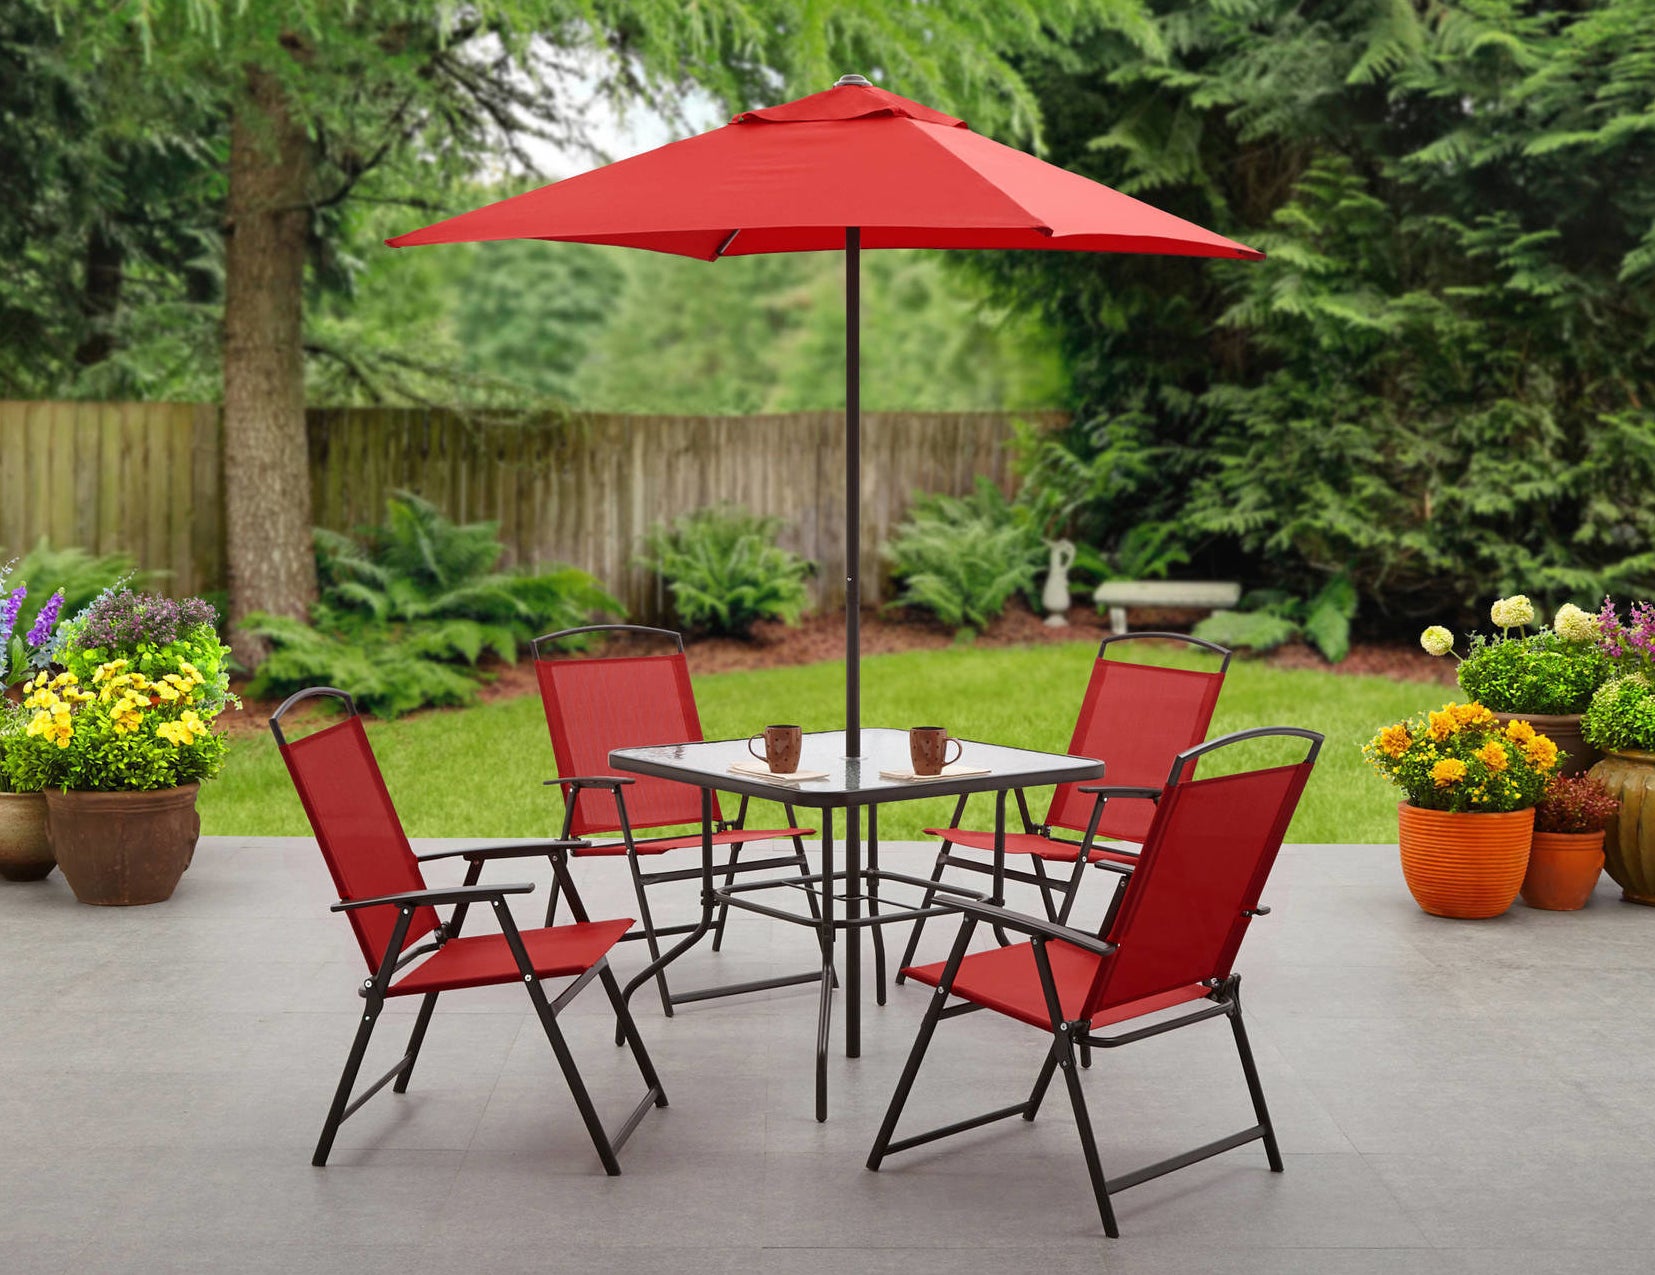 four matching red folding chairs, a square table, and a center folding umbrella 